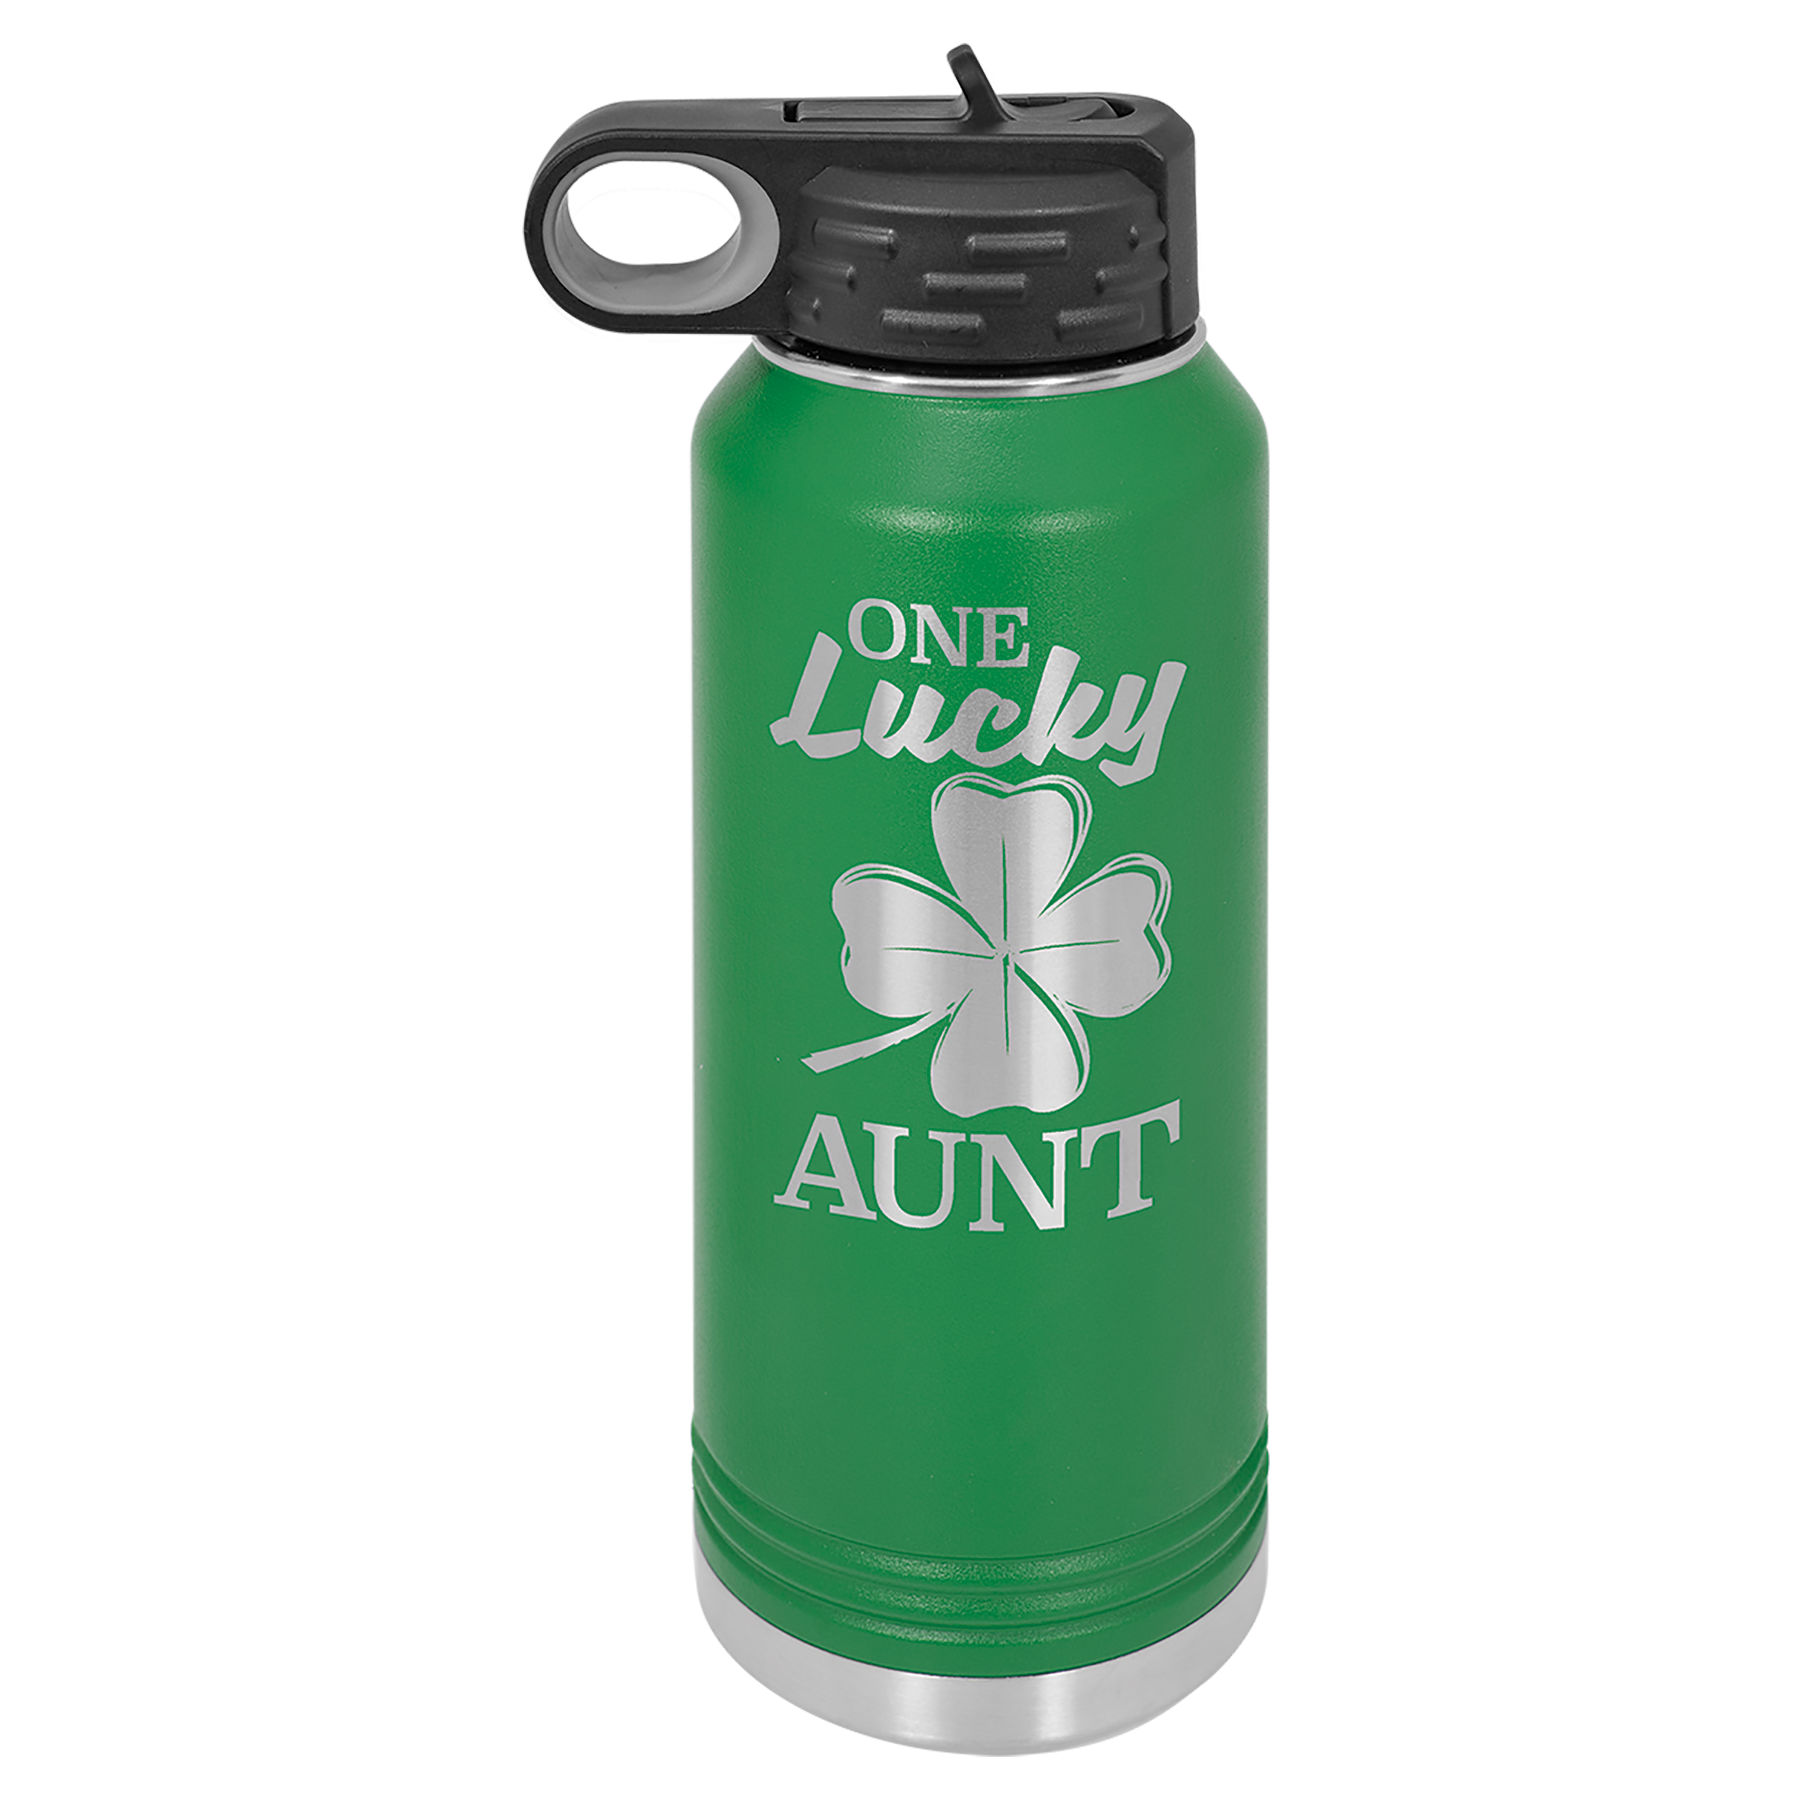 32 oz. Green Stainless Steel Insulated Water Bottle.  Customizable with your personal image or saying.